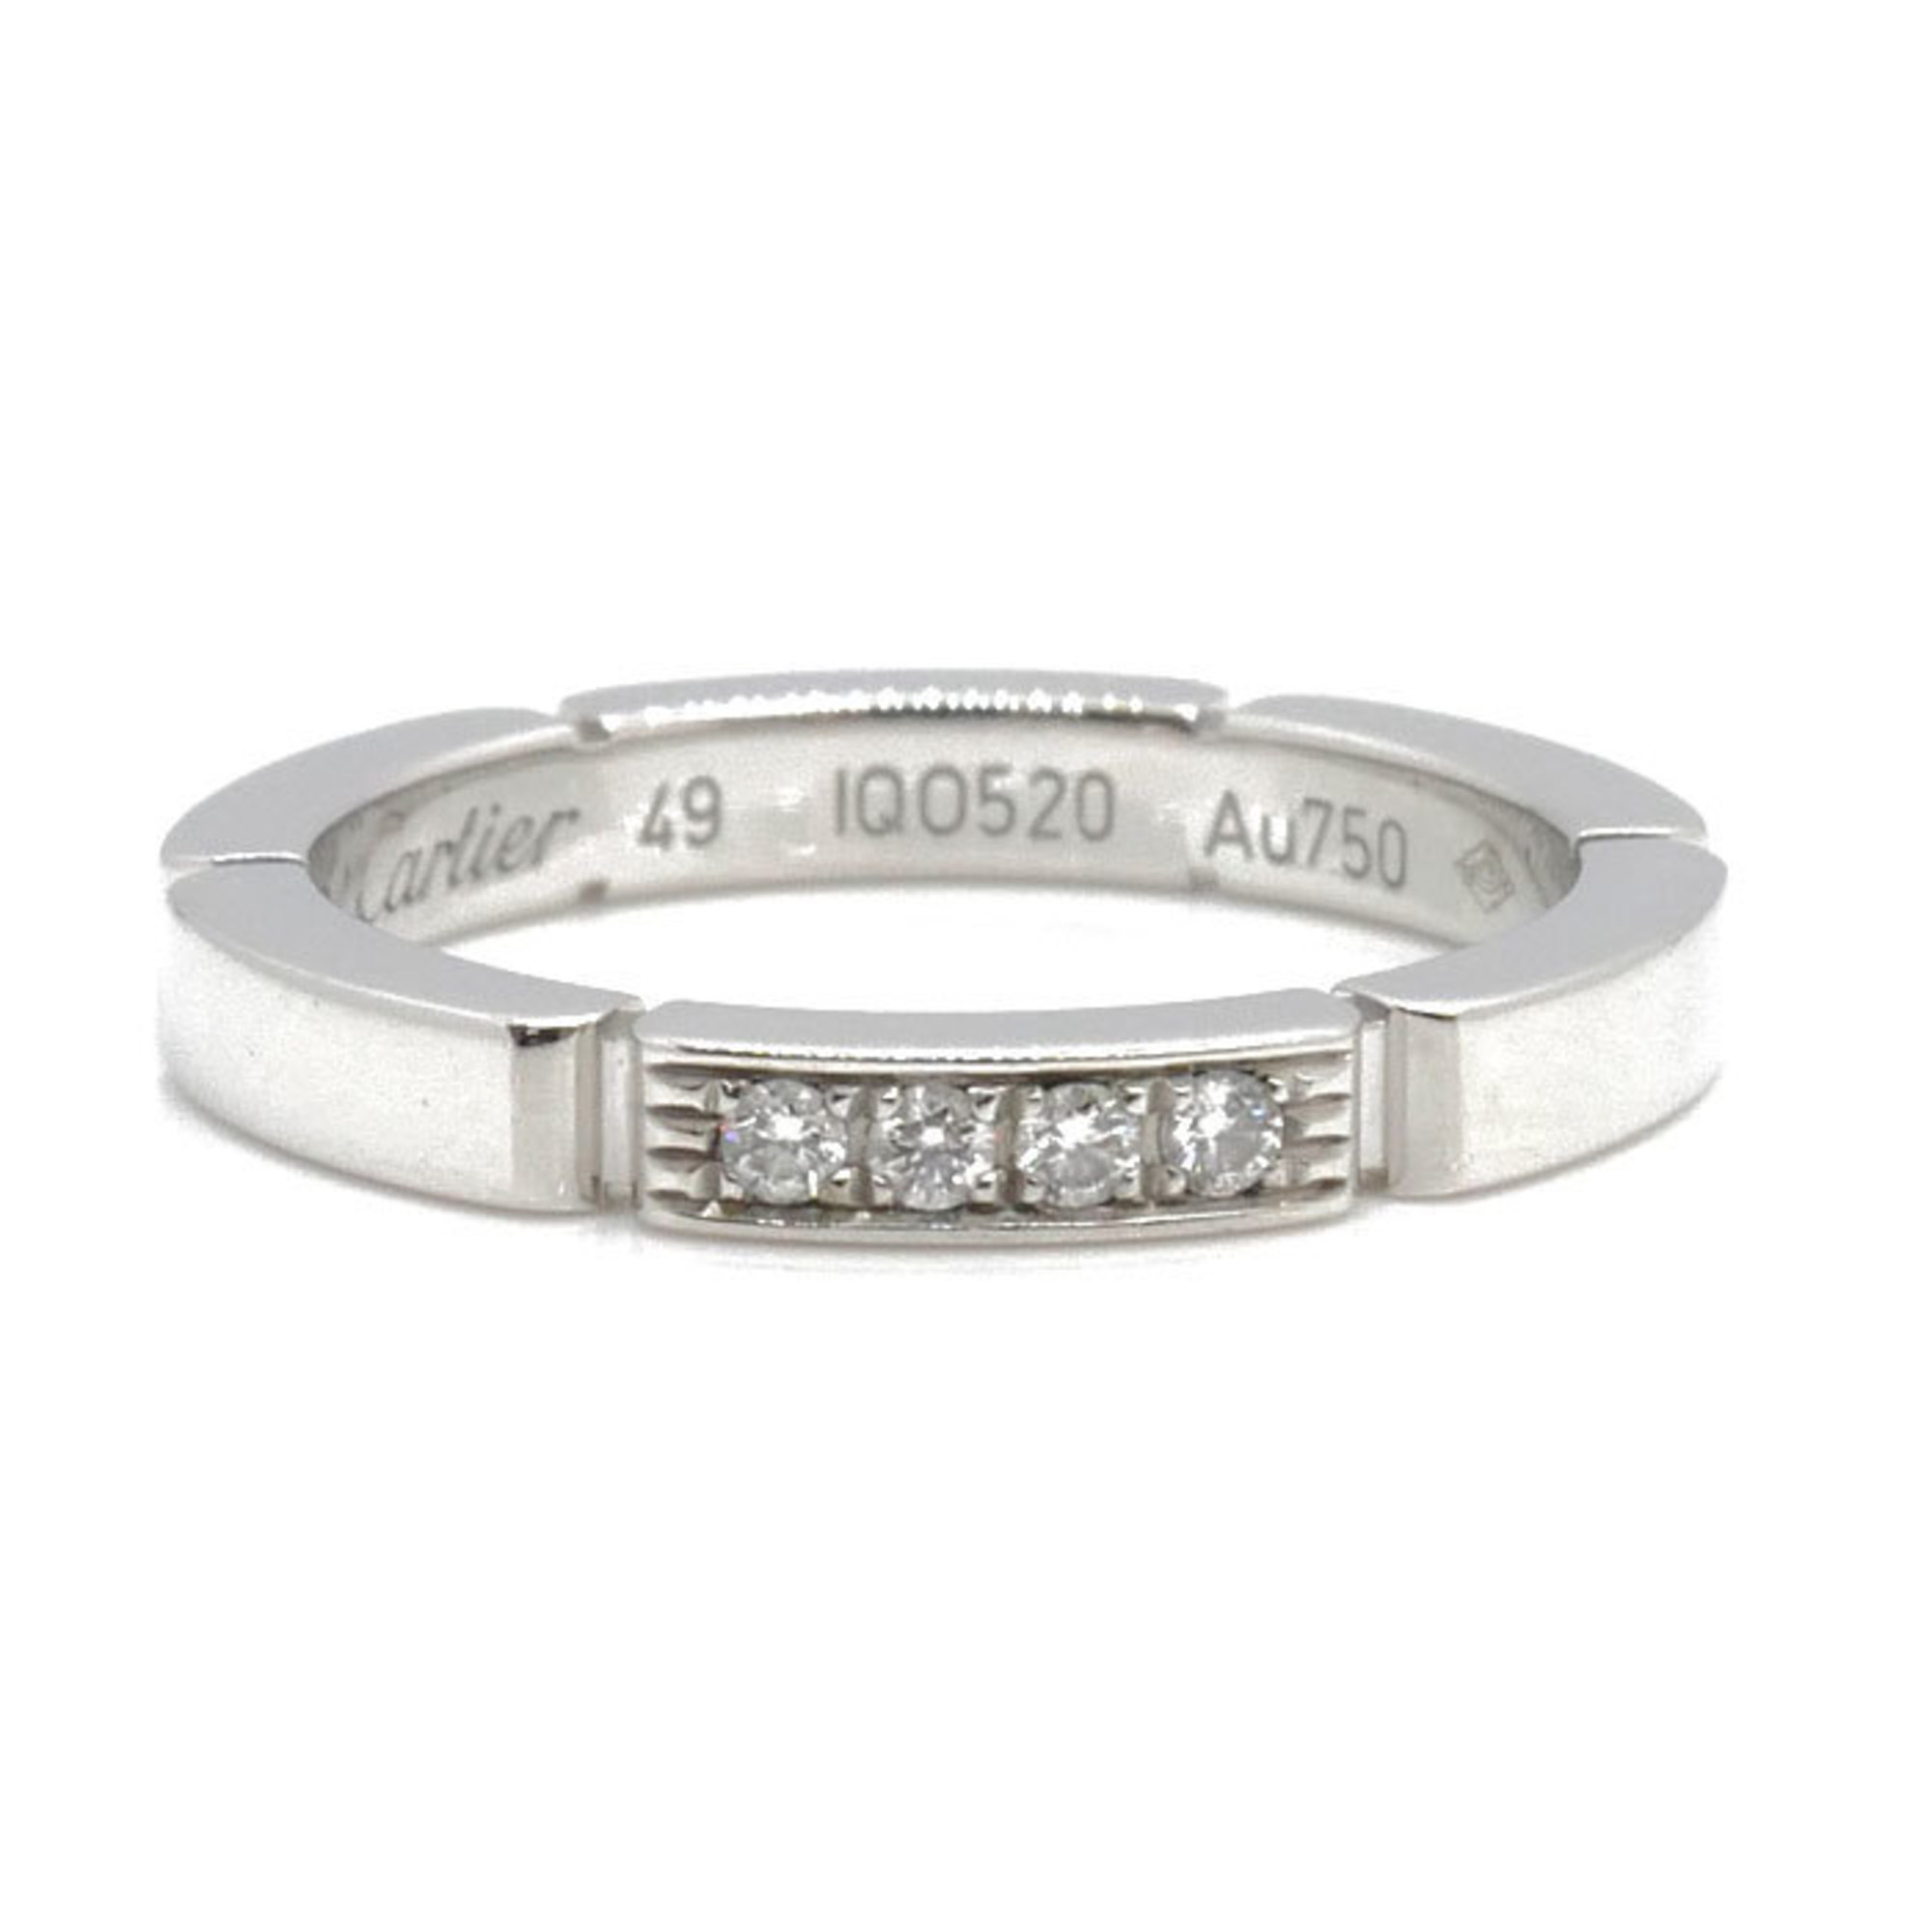 CARTIER Cartier K18WG White Gold Maillon Panthere 4PD Ring B4080449 Diamond Size 9 49 4.0g Women's